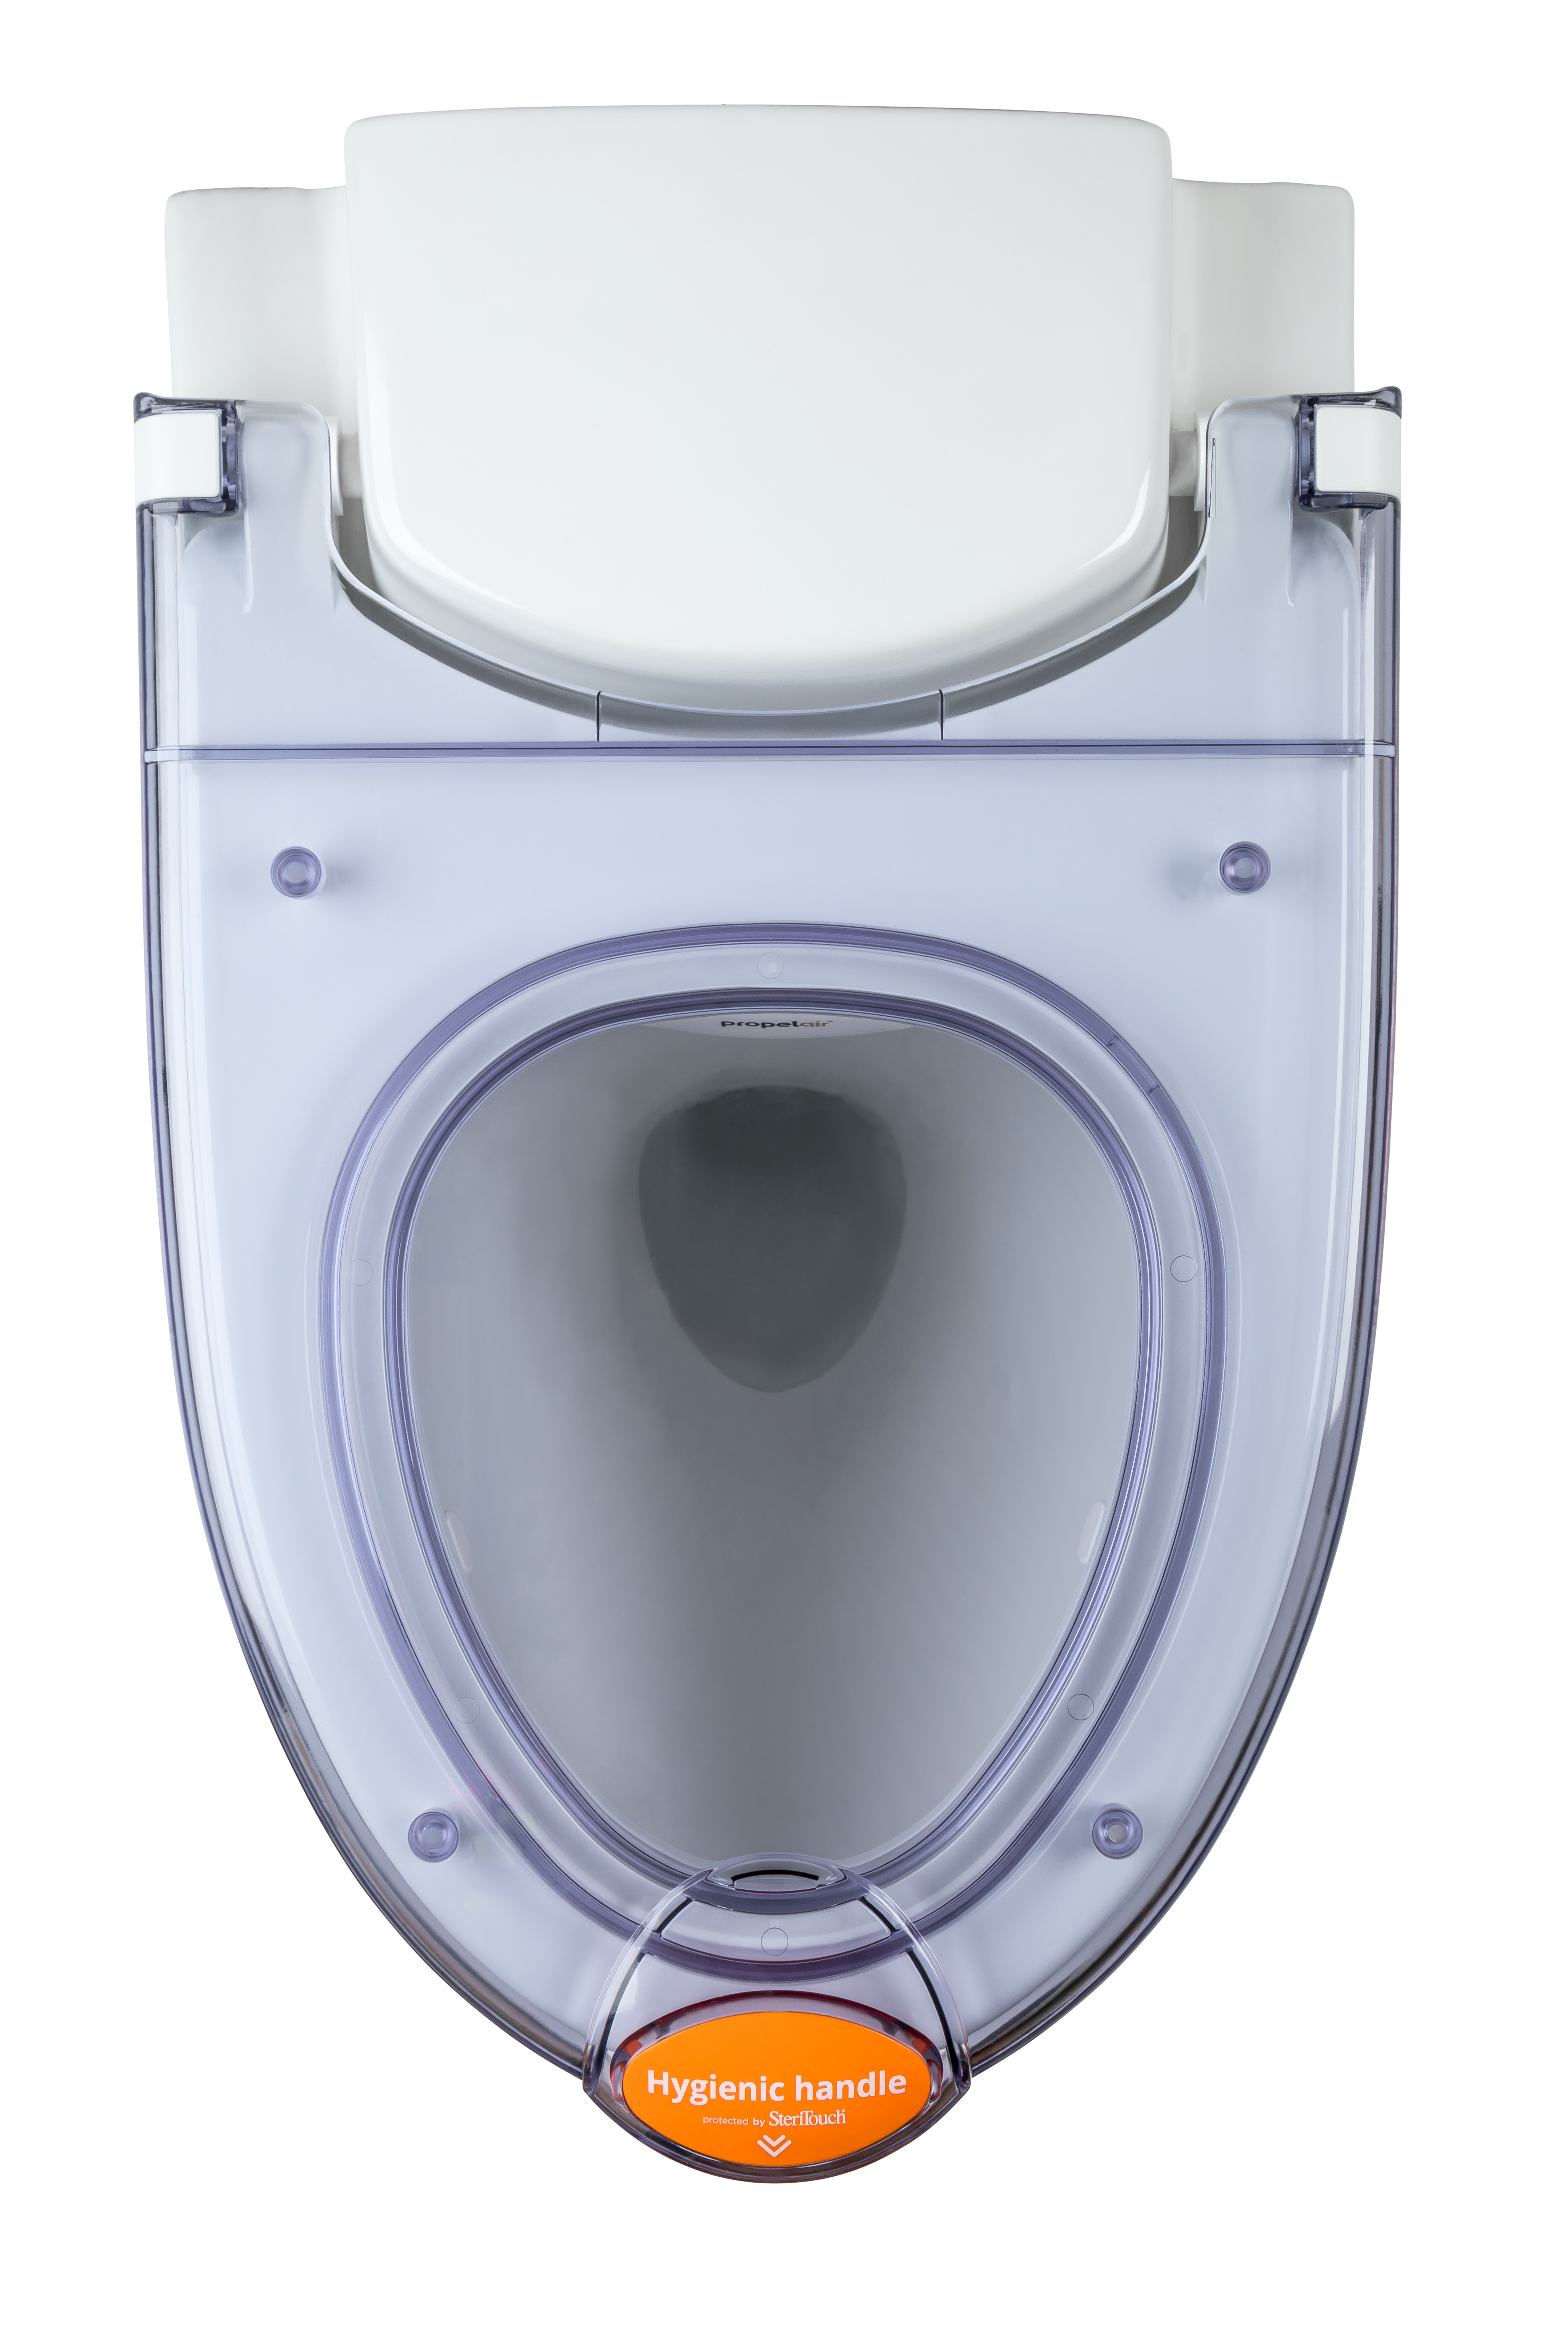 Propelair toilet seen from above